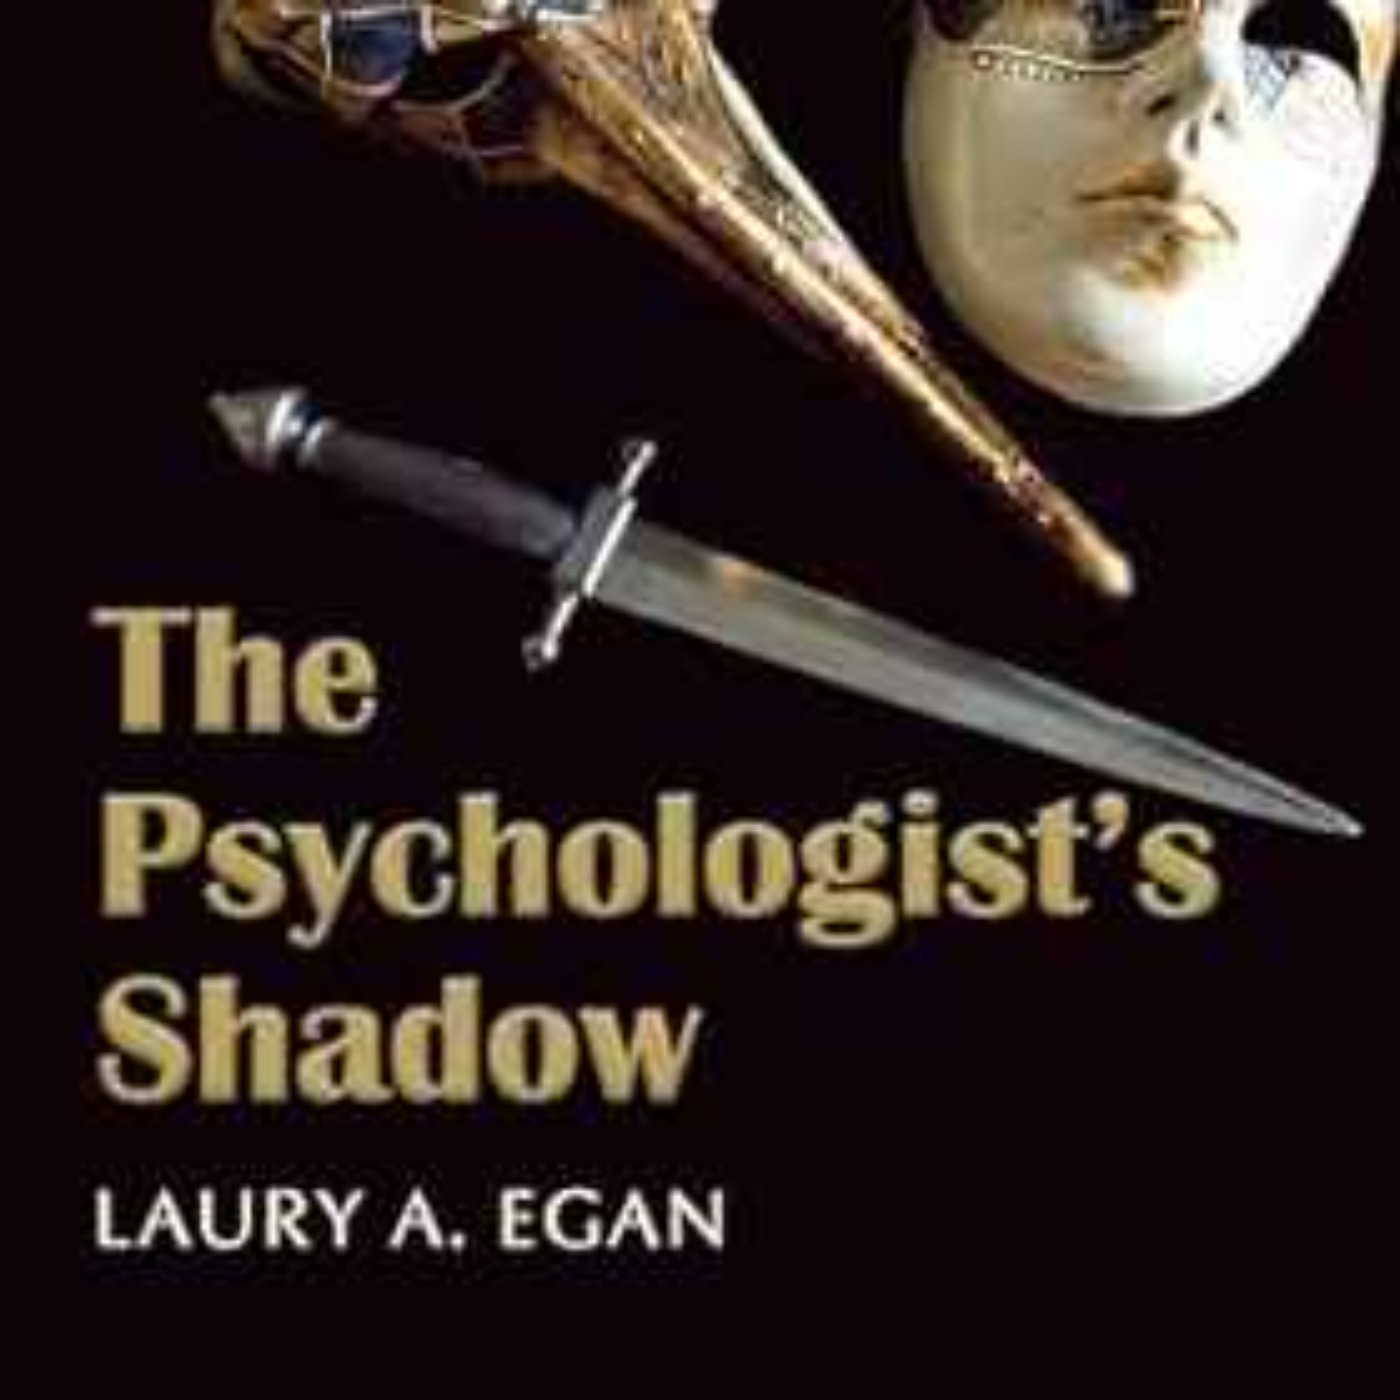 Laury A. Egan - The Psychologist's Shadow